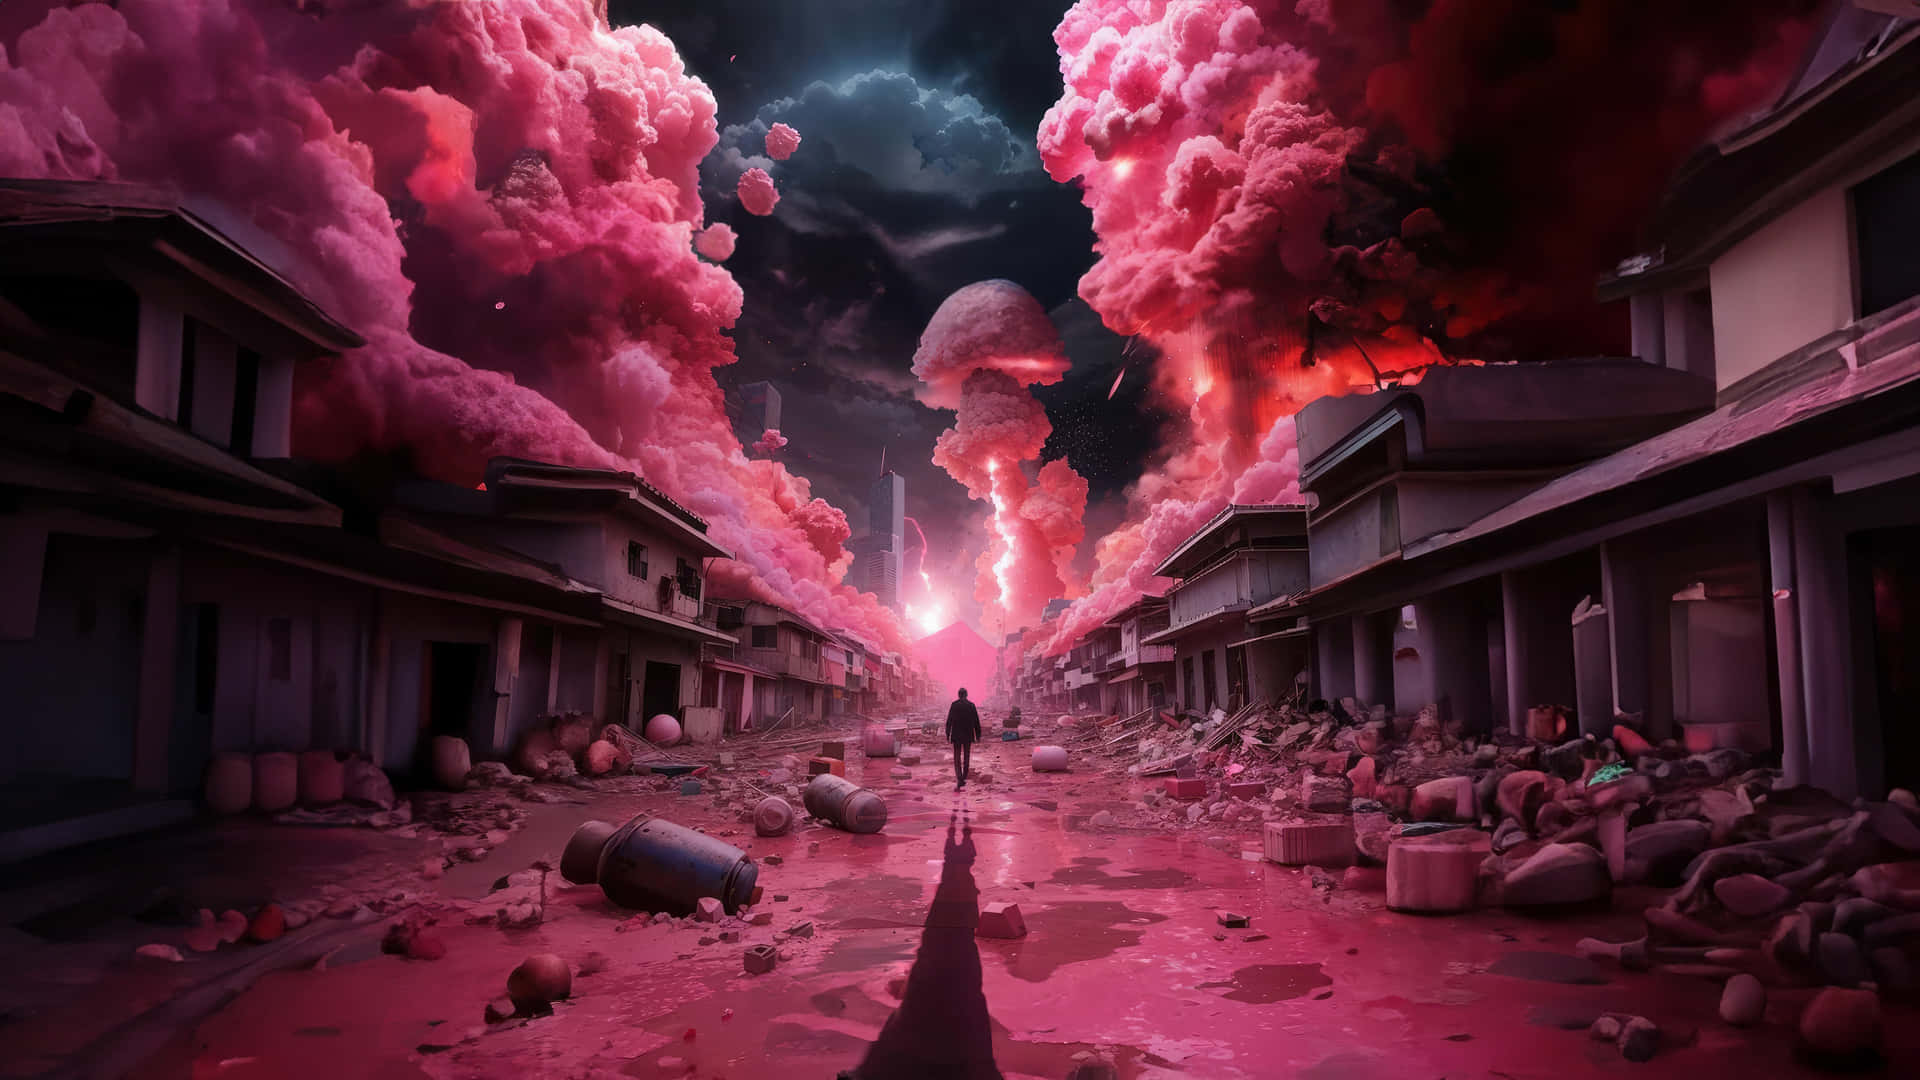 Apocalyptic_ Vision_with_ Figure_and_ Mushroom_ Clouds Wallpaper